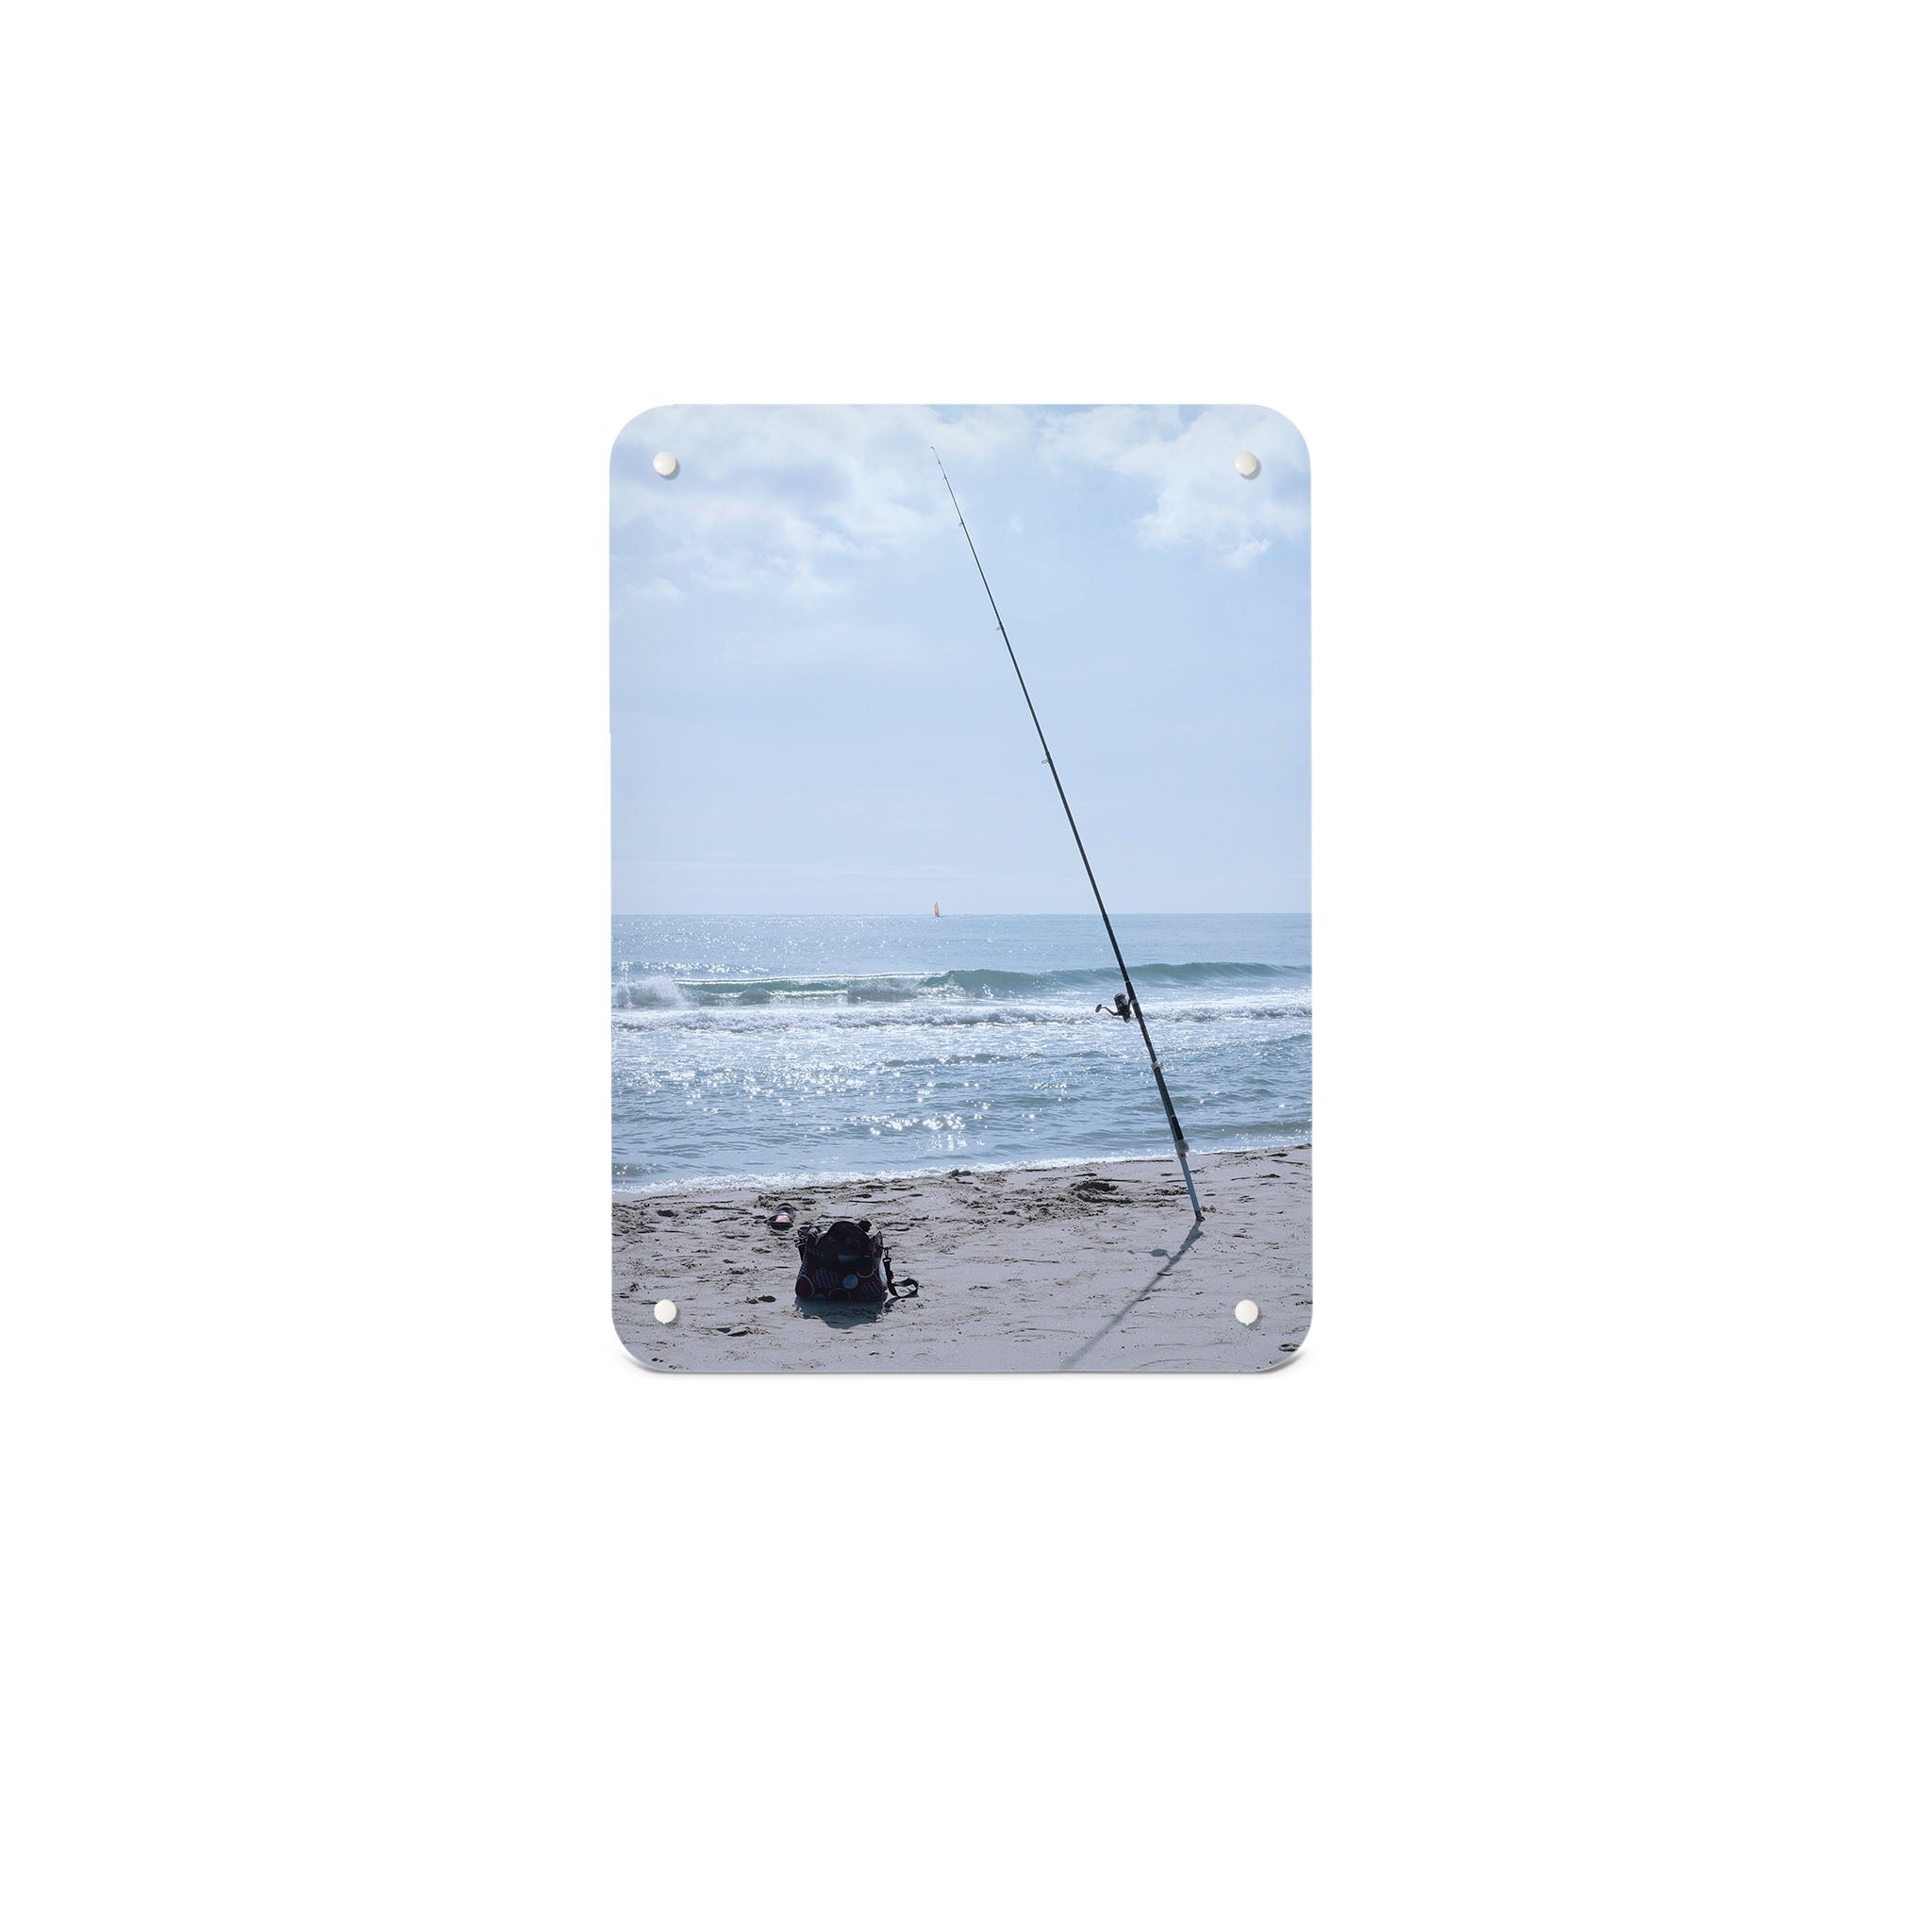 A small magnetic notice board by Beyond the Fridge with a photograph of fishing tackle on a sunny beach